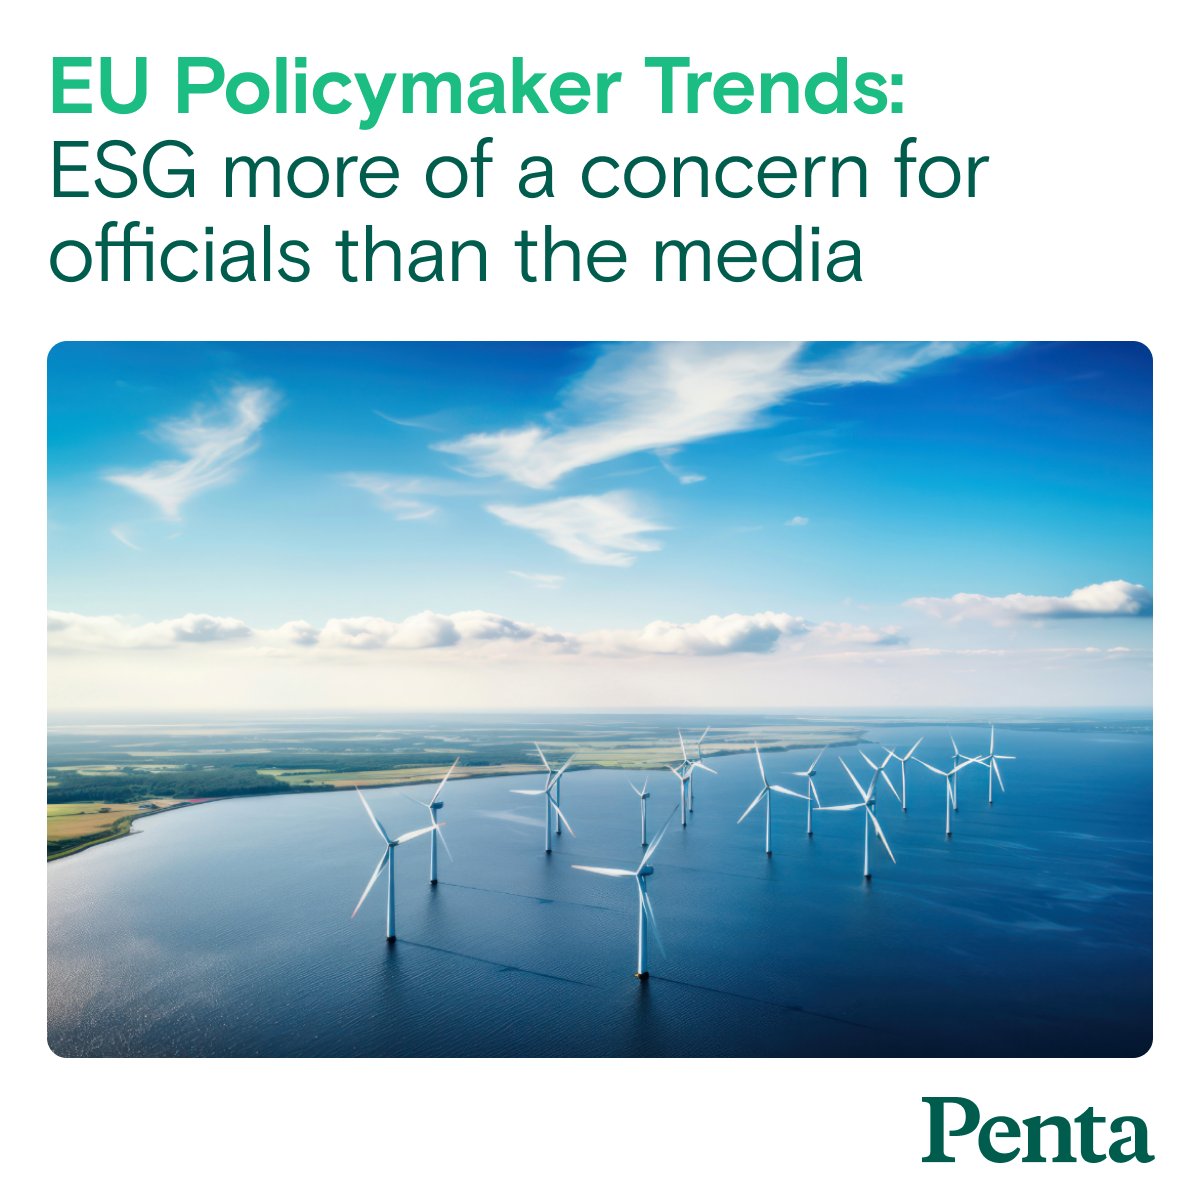 The Environment is a top priority for Brussels policymakers, but receives less attention from EU media. Interested in reading more of our research? Read our 2023 EU Insights Review to see what policymakers have to say and best practices for engagement. bit.ly/3Sj4gvM